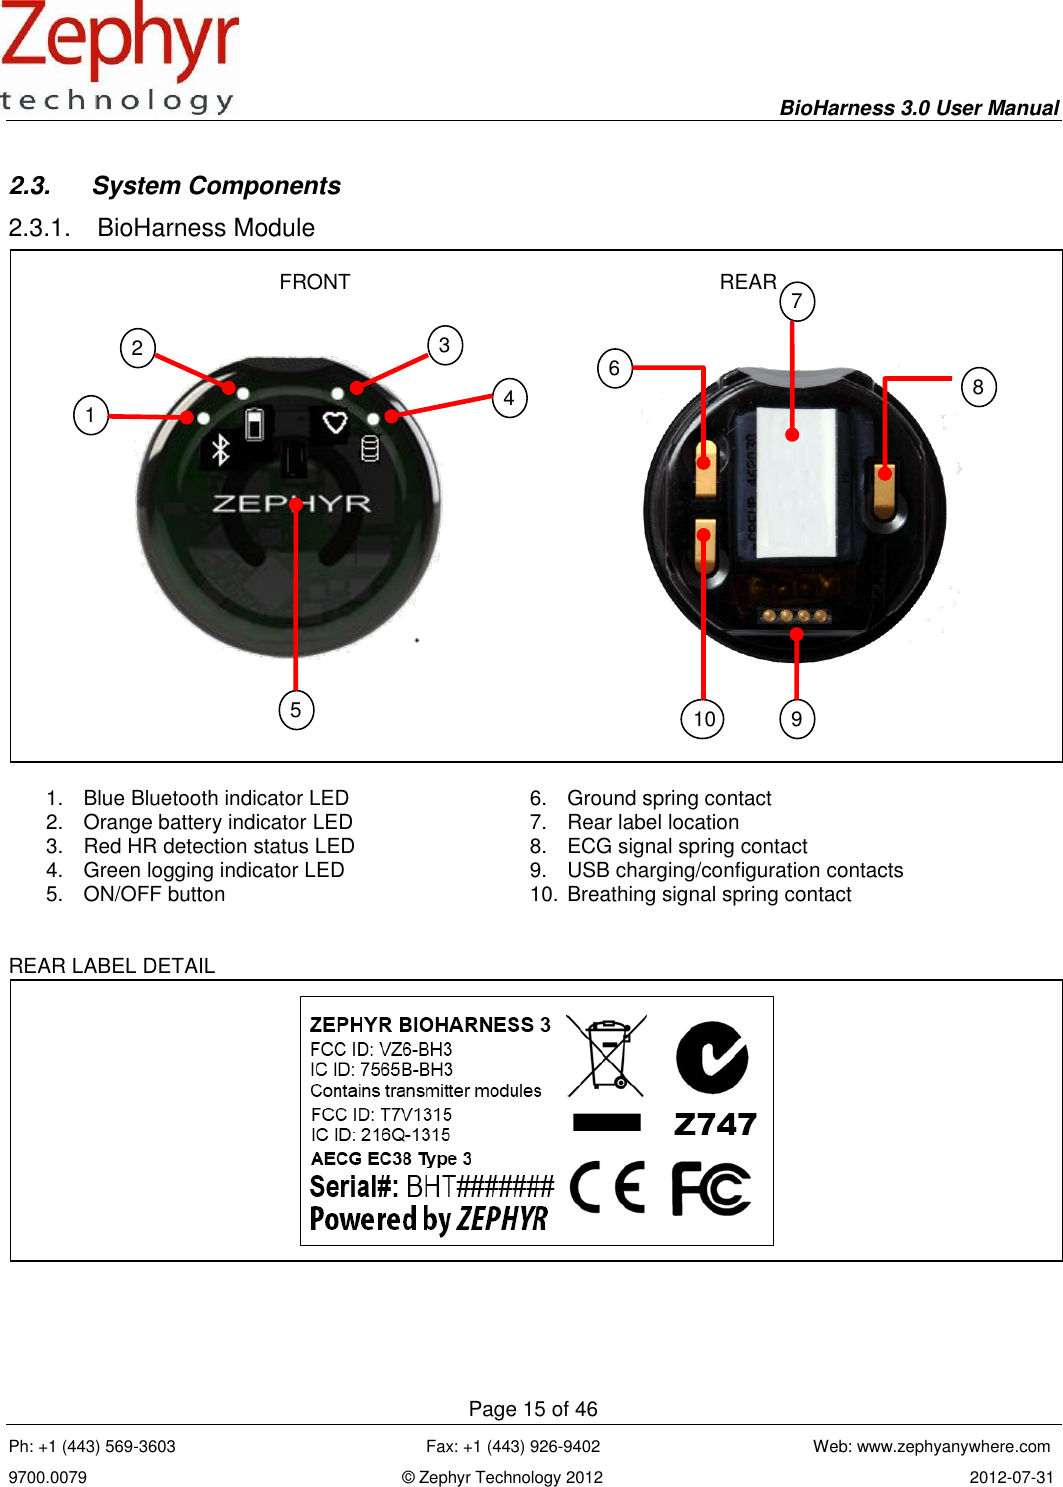     BioHarness 3.0 User Manual  Page 15 of 46 Ph: +1 (443) 569-3603                                                      Fax: +1 (443) 926-9402                                              Web: www.zephyanywhere.com 9700.0079                                                                    © Zephyr Technology 2012                                                                               2012-07-31                                                                                                                                      2.3.  System Components 2.3.1.  BioHarness Module   1.  Blue Bluetooth indicator LED 2.  Orange battery indicator LED 3.  Red HR detection status LED 4.  Green logging indicator LED 5.  ON/OFF button  6.  Ground spring contact 7.  Rear label location 8.  ECG signal spring contact 9.  USB charging/configuration contacts  10. Breathing signal spring contact  REAR LABEL DETAIL  FRONT REAR 1 2 3 5 6 9 10 8 7 4 